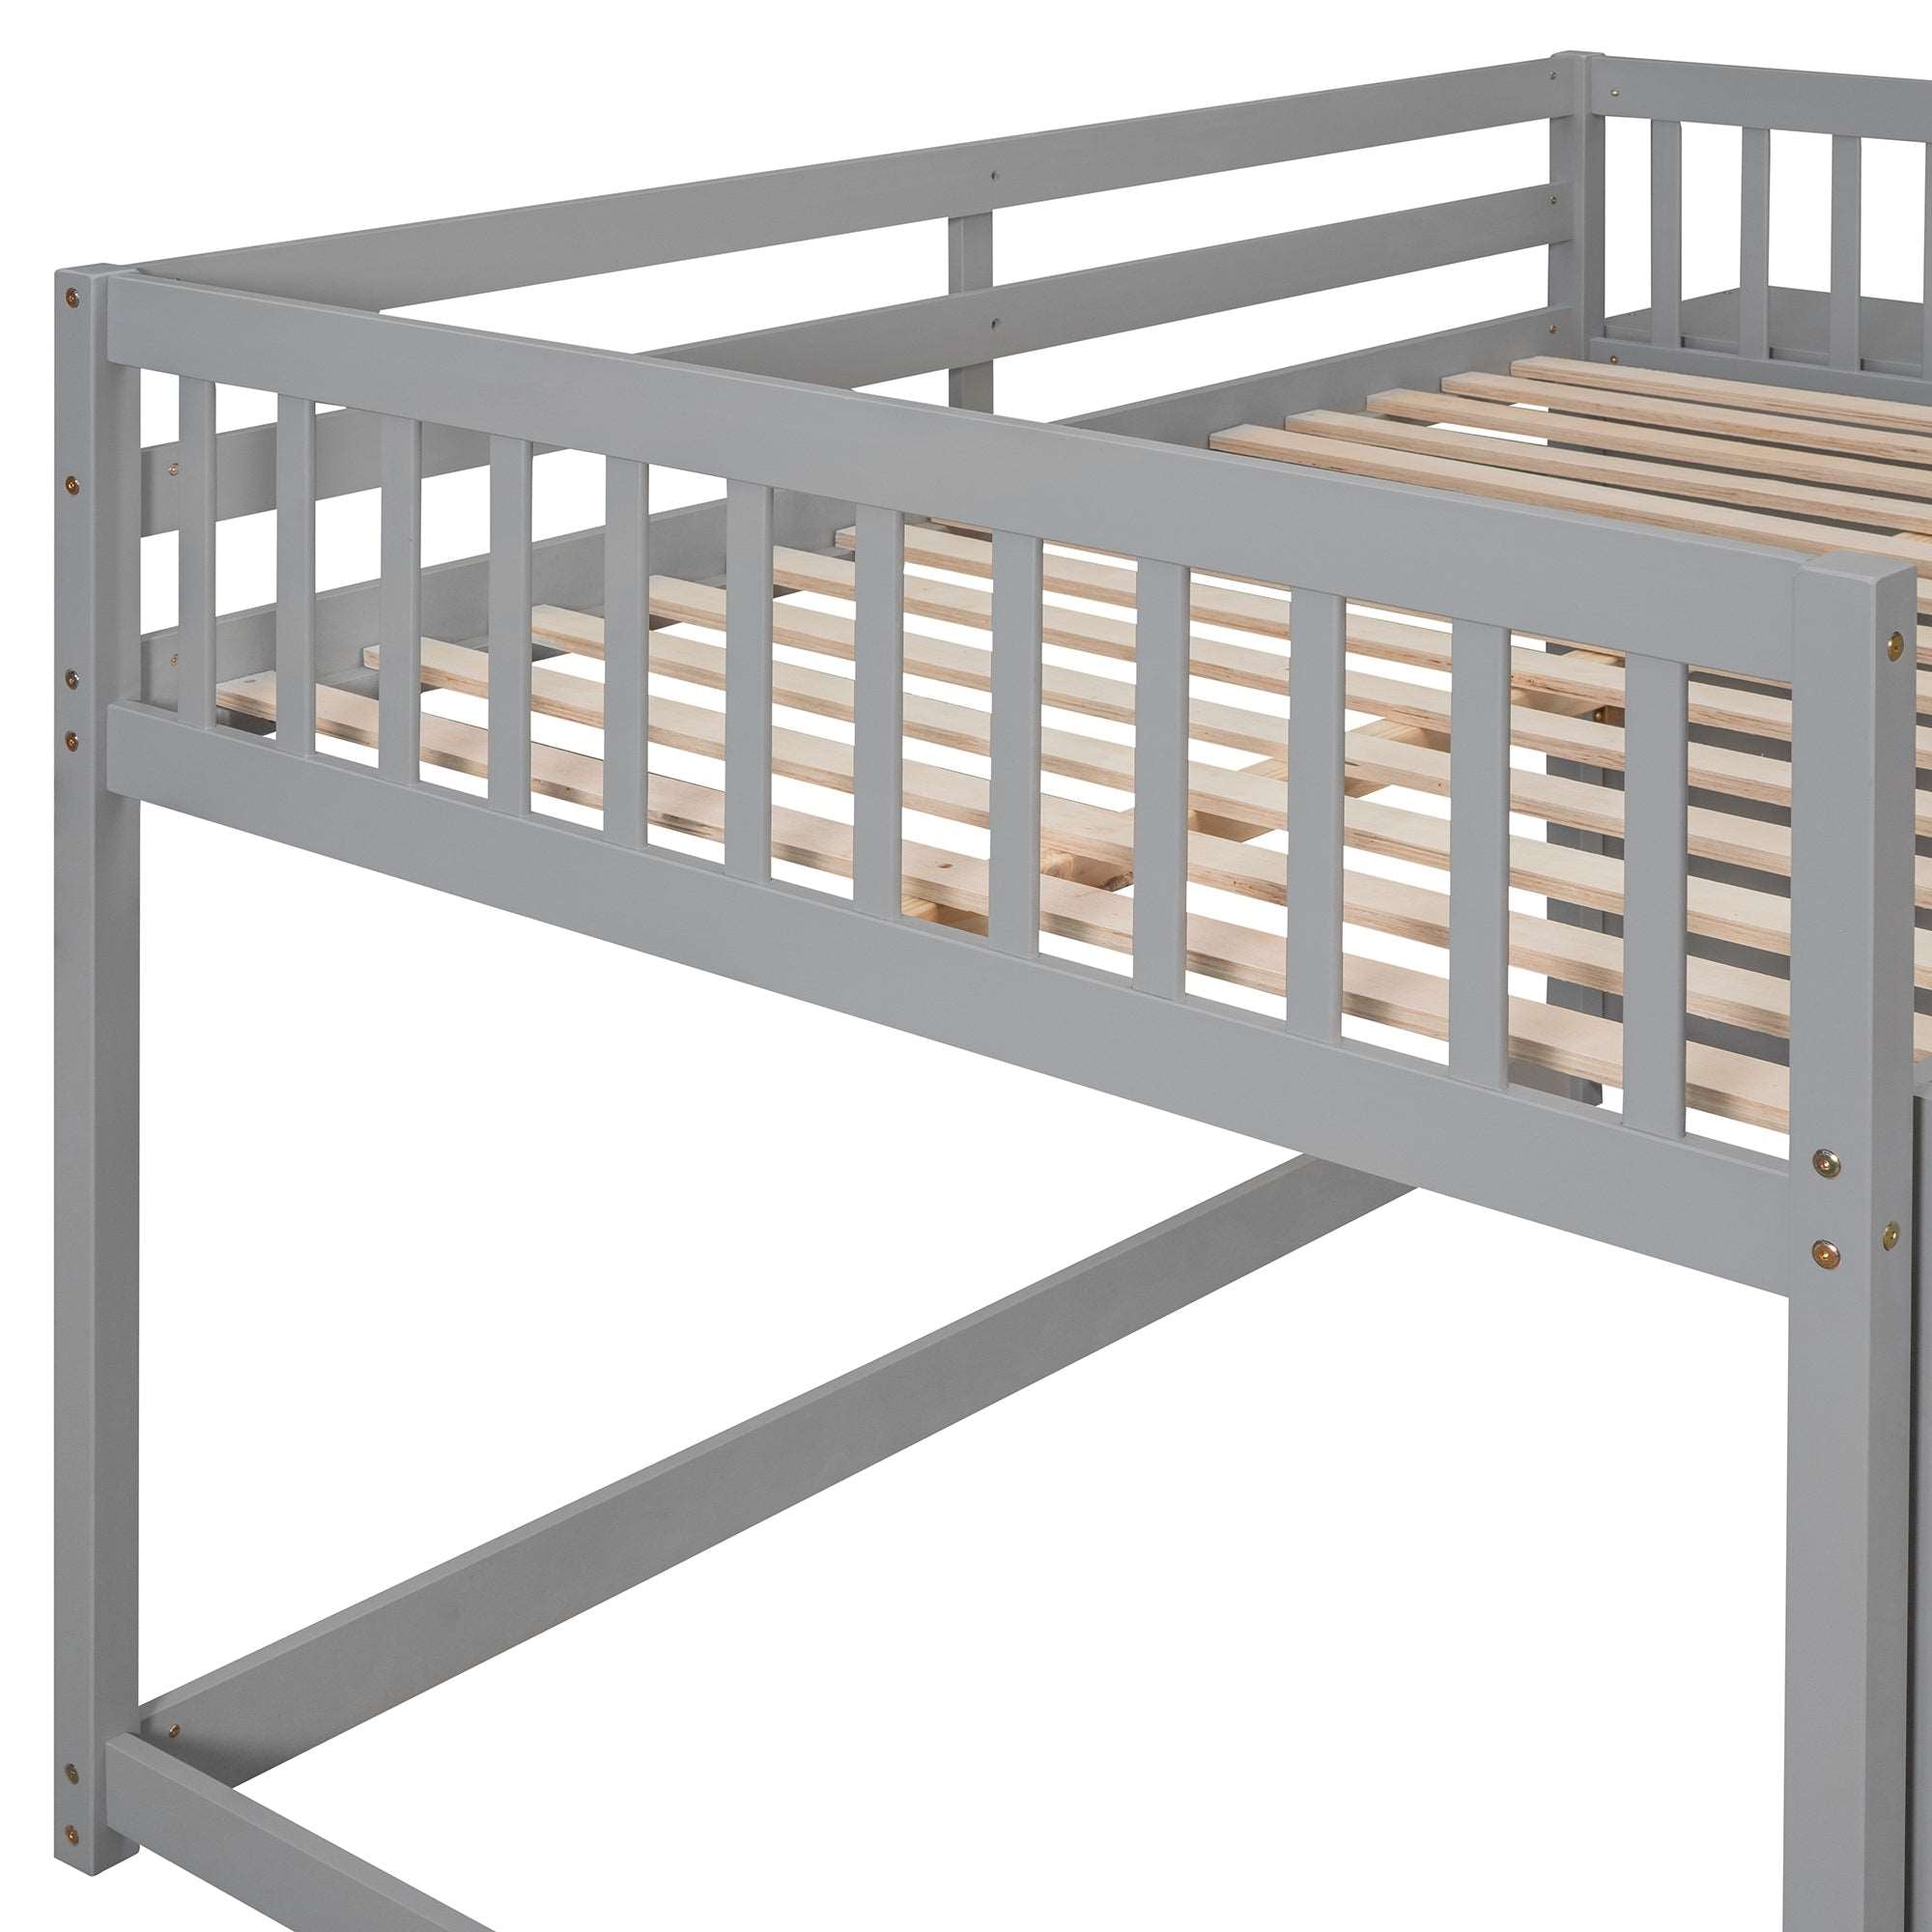 Bellemave Bunk Bed with 4 Drawers and 3 Shelves - Bellemave